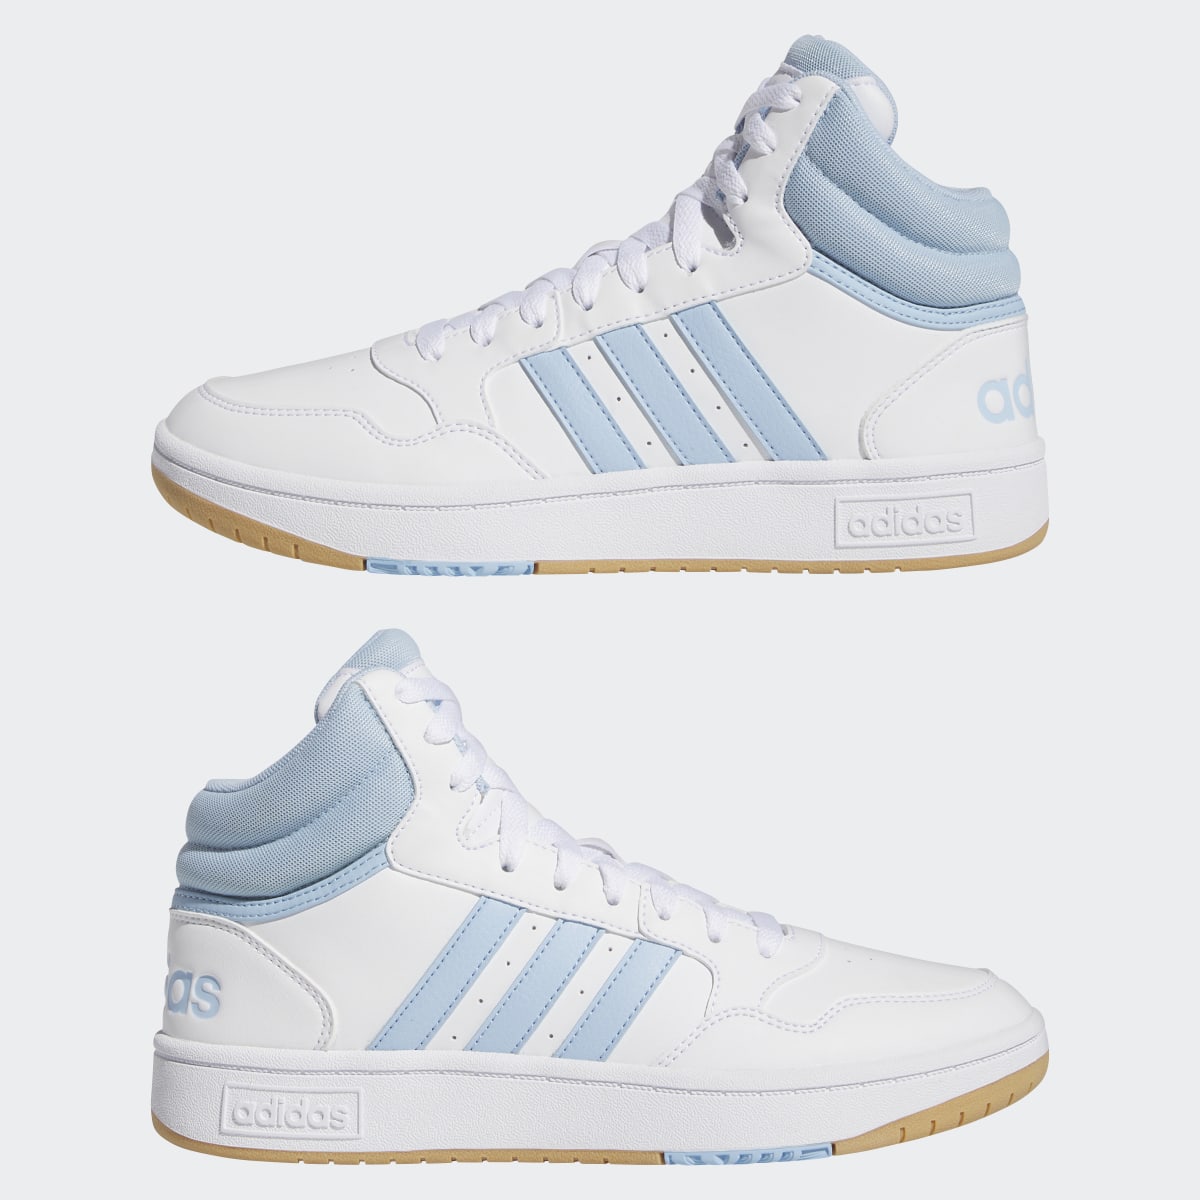 Adidas Hoops 3.0 Mid Shoes. 8